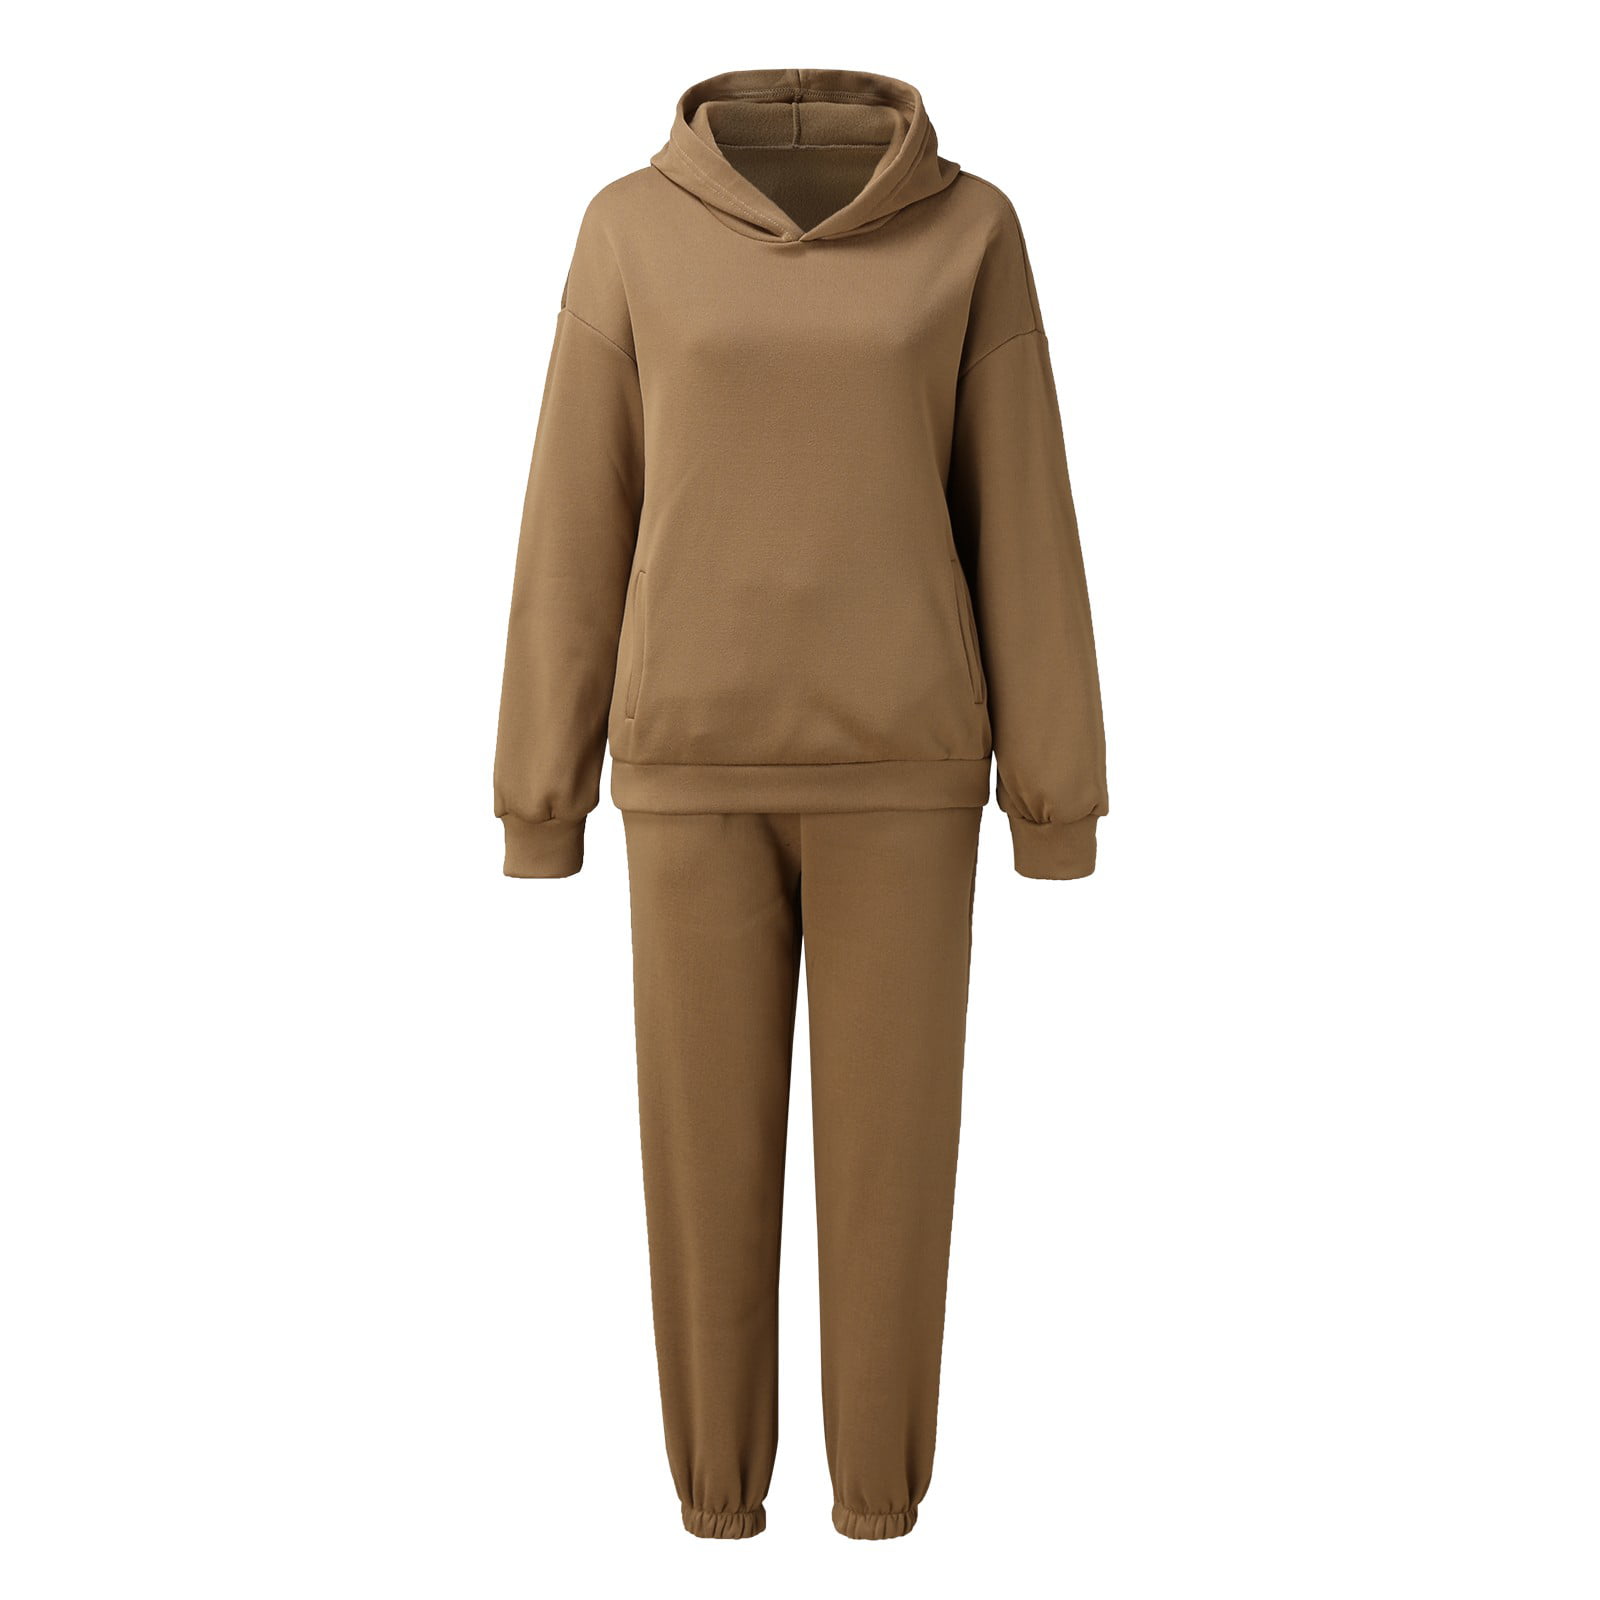 Classy Winter Tracksuit Set For Women Fleece Hollow Out Cropped Hoodie And  Cotton Vest Jogging Pants From Wumartstore888, $22.98